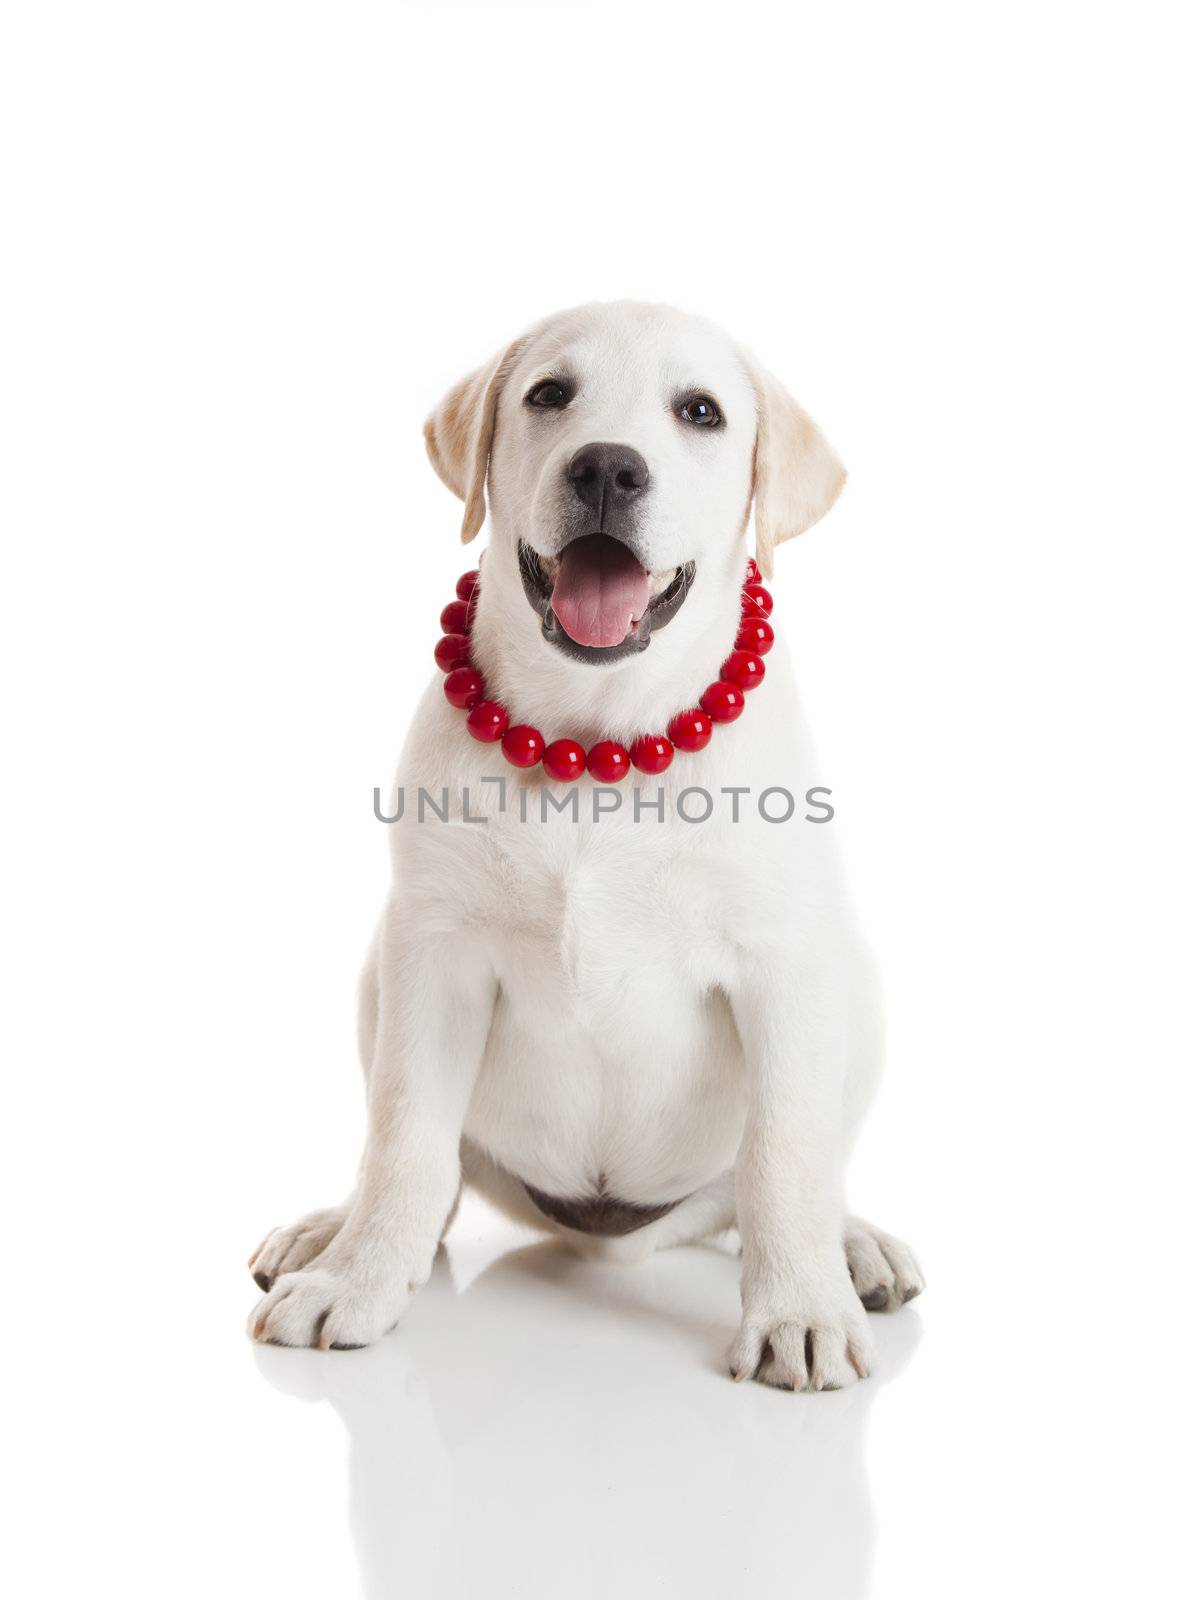 Labrador retriever puppy wearing a red collar, isolated on white